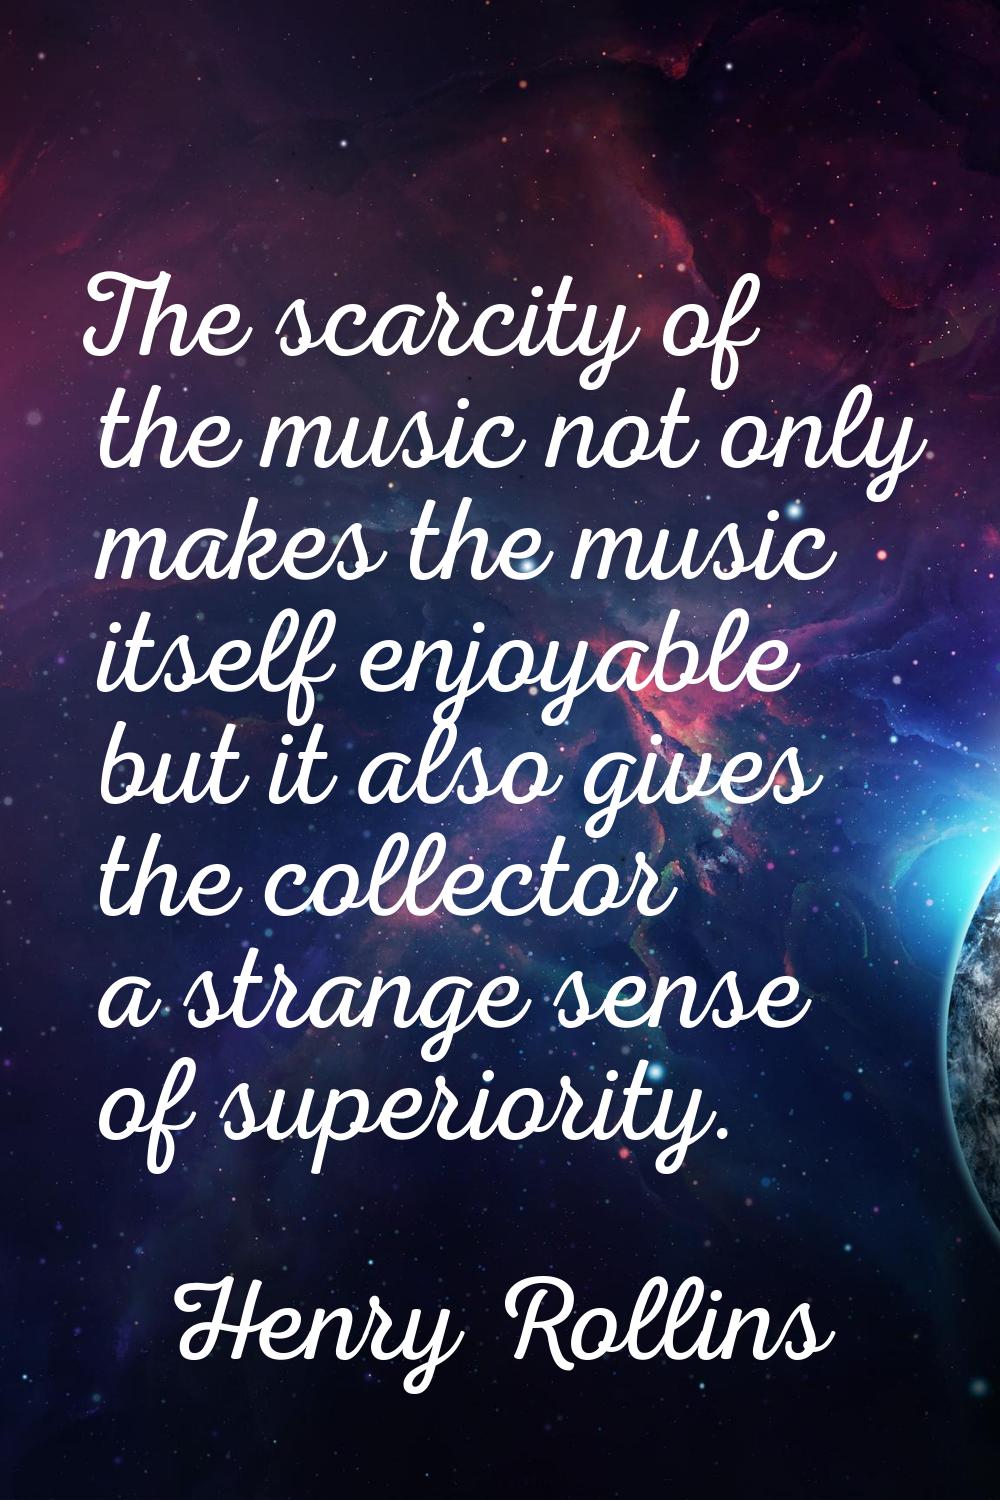 The scarcity of the music not only makes the music itself enjoyable but it also gives the collector